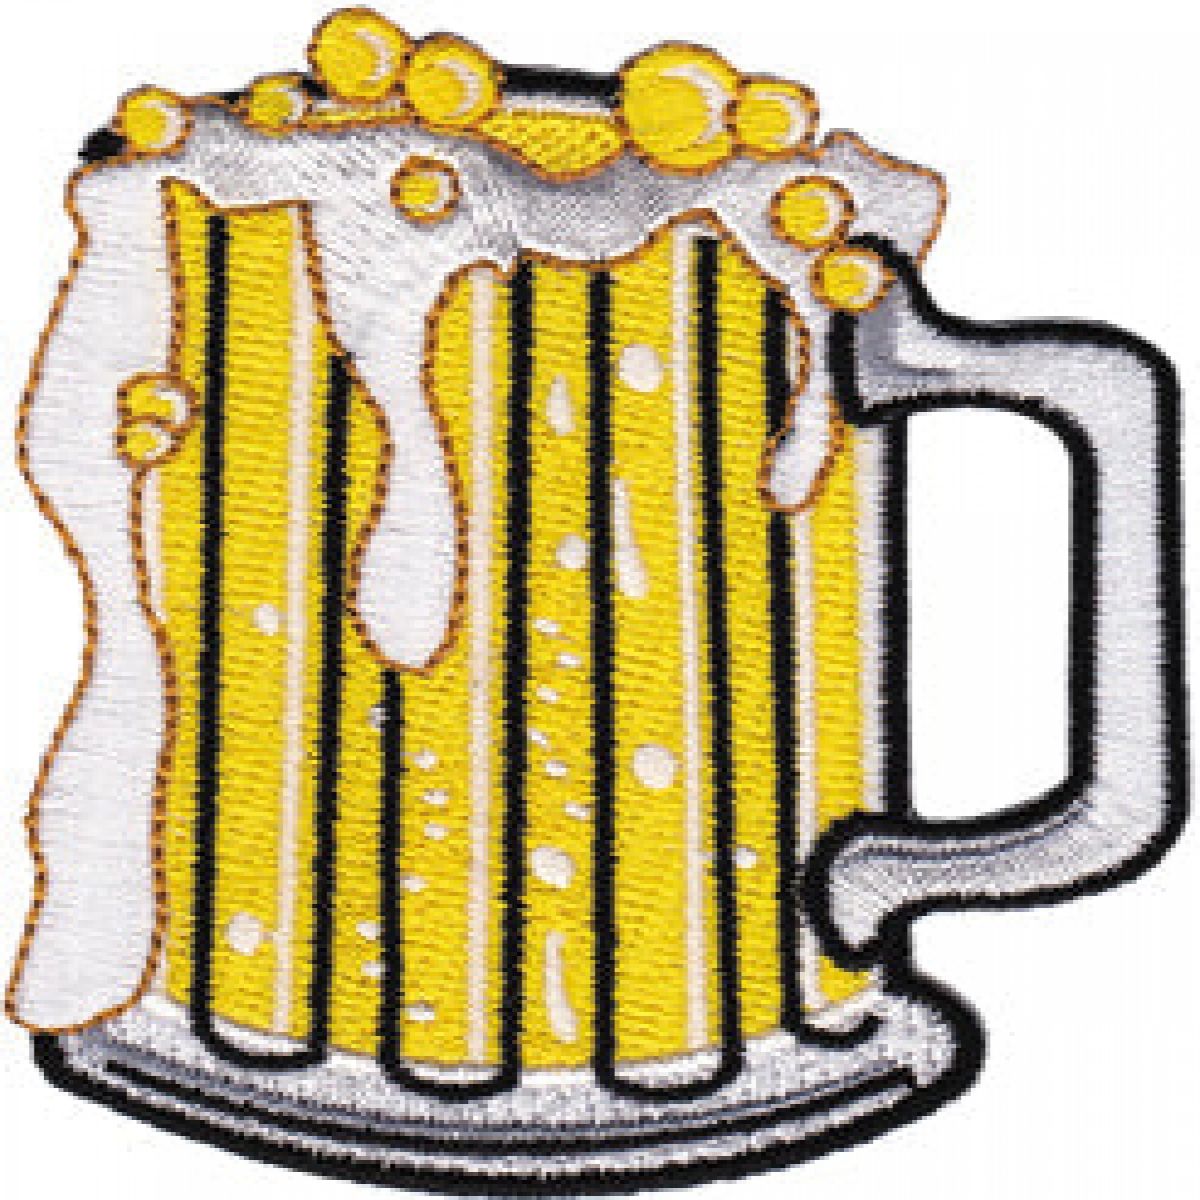 Picture of Drinking 850496 3 x 3.2 in. Mug of Beer Patch